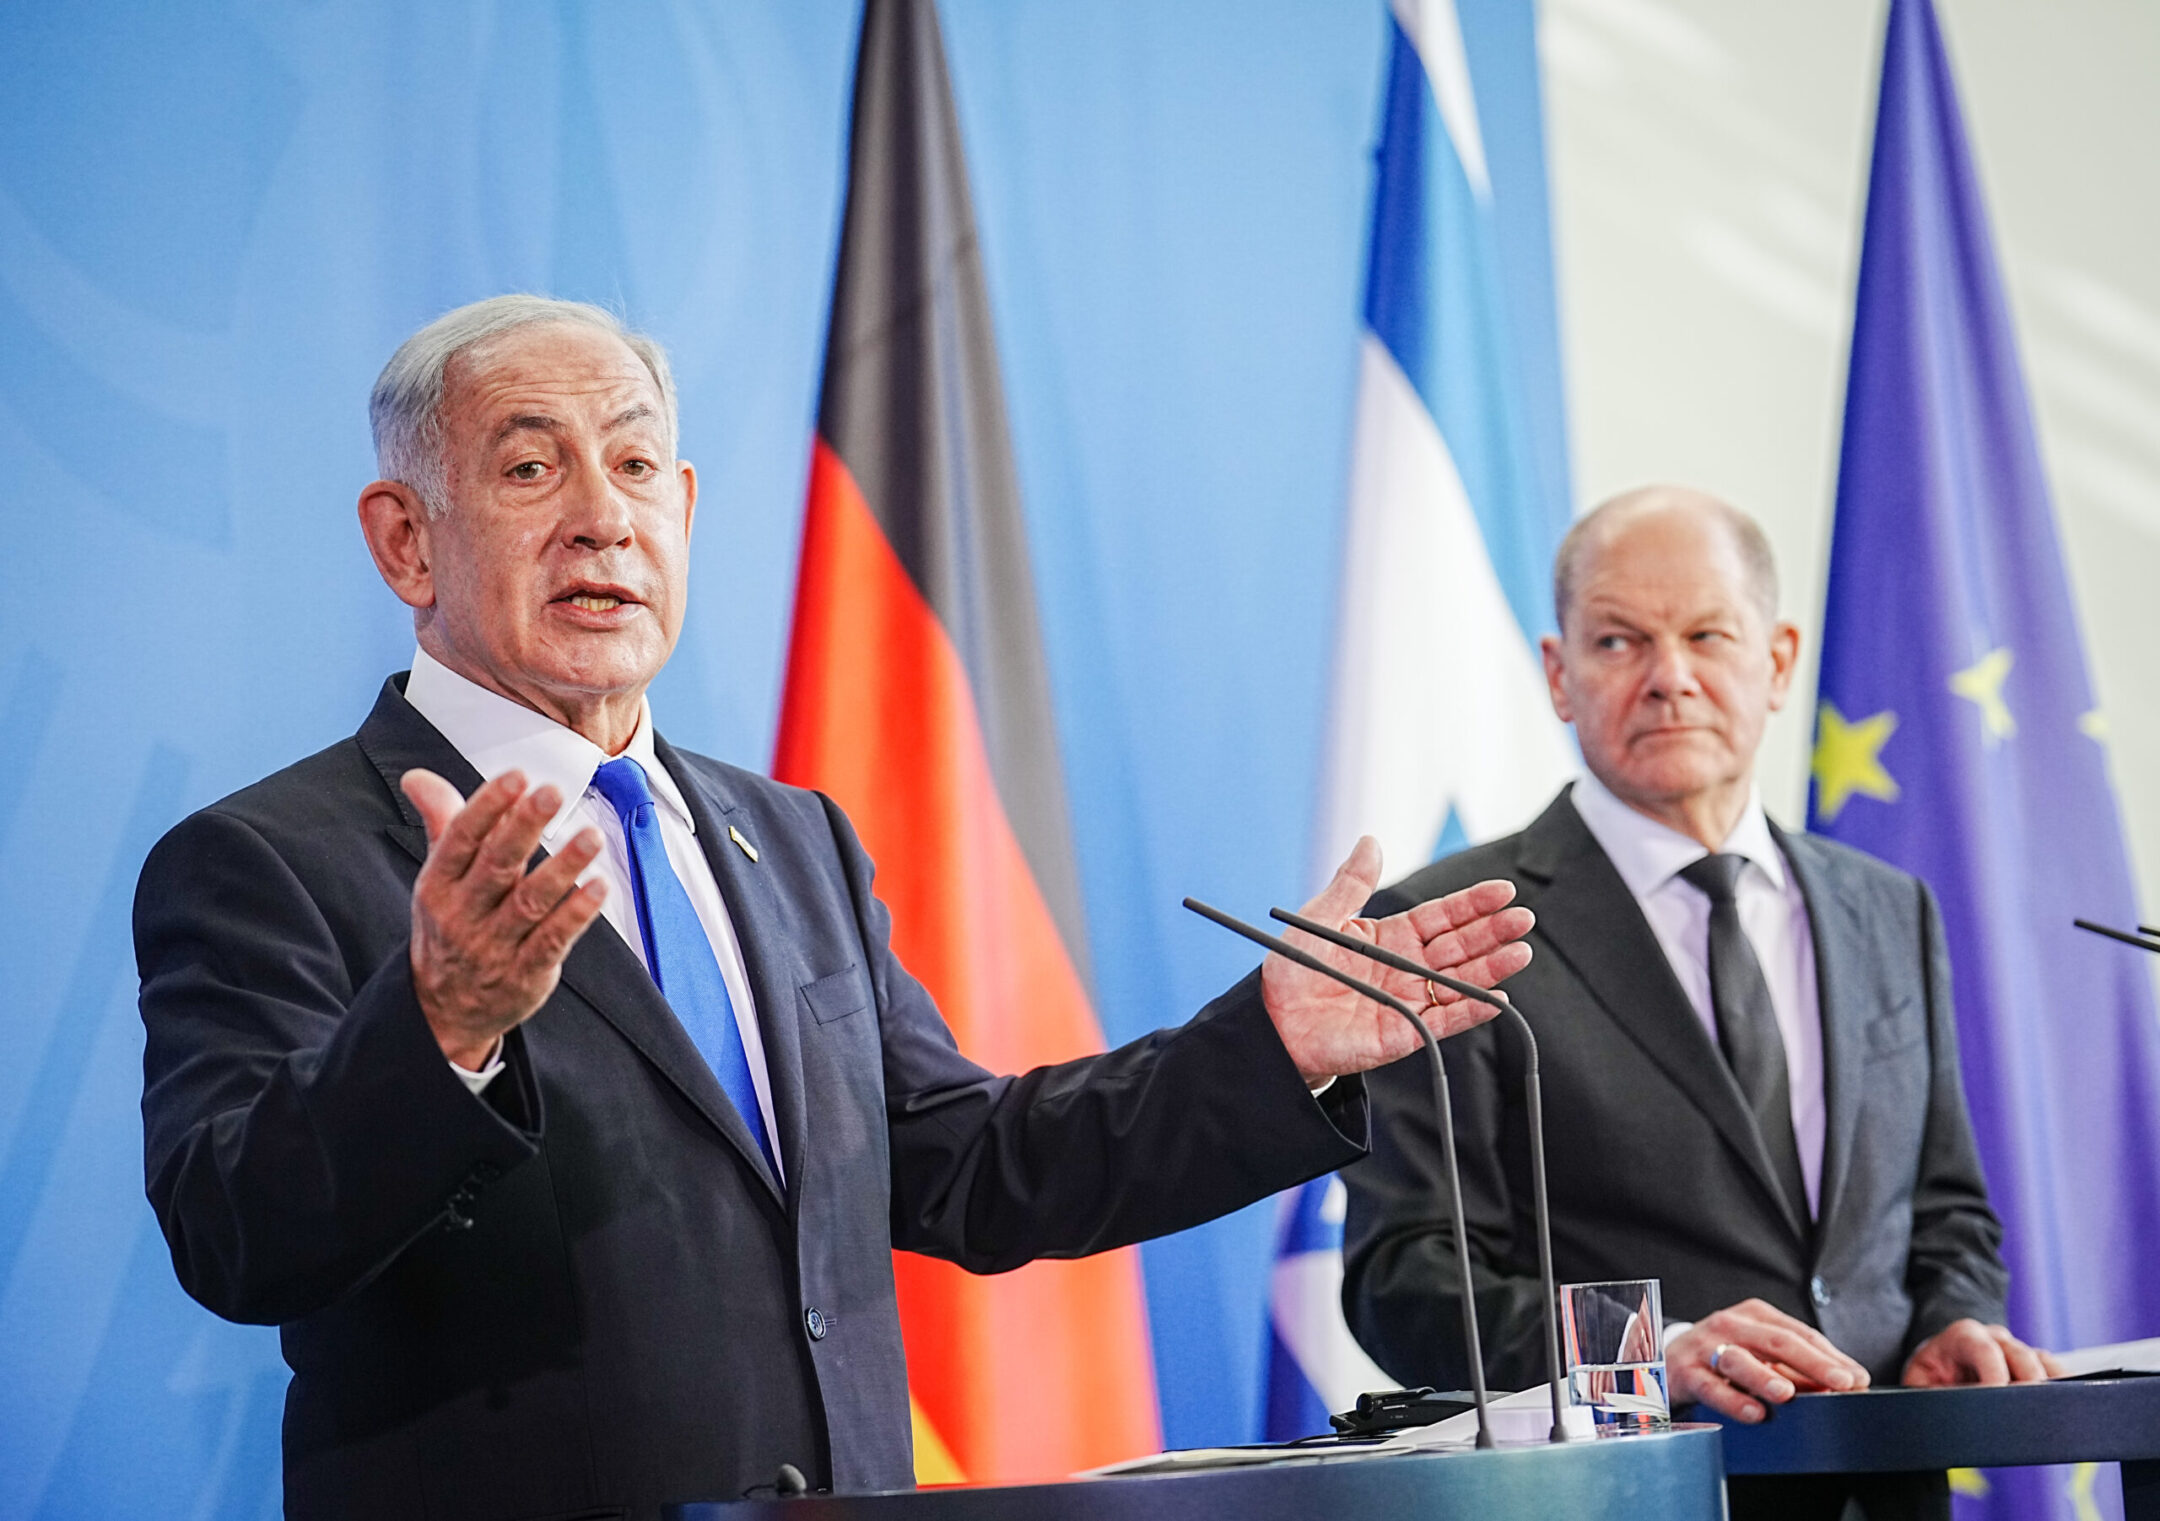 German Chancellor Olaf Scholz (R) and Benjamin Netanyahu. prime minister of Israel, hold a press conference at the chancellor’s office in Berlin, March 16, 2023 (Kay Nietfeld/picture alliance via Getty Images)